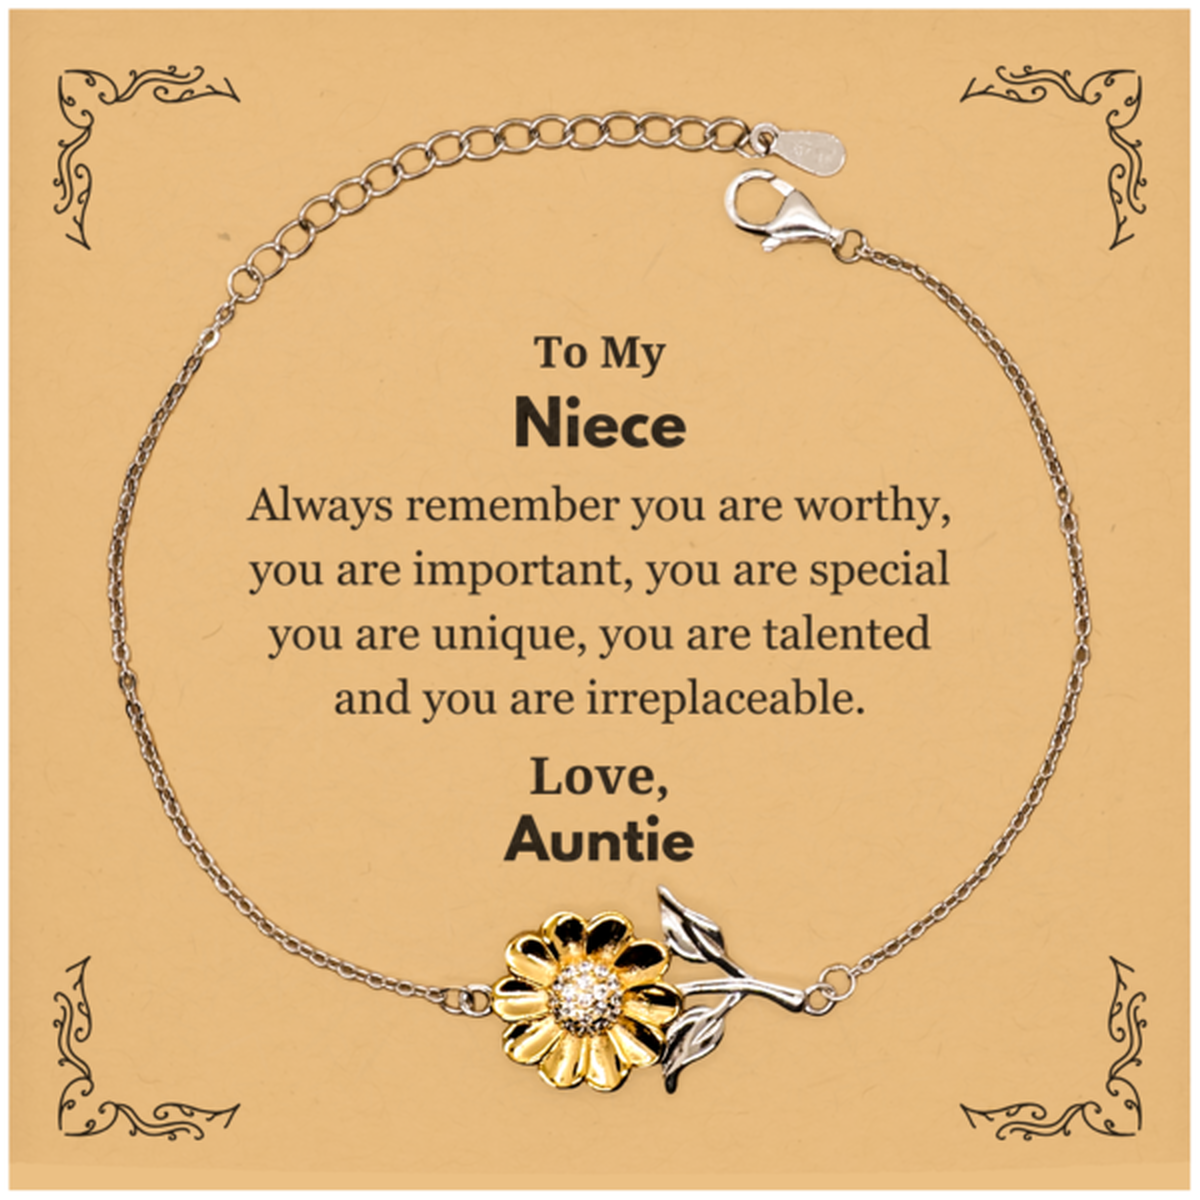 Niece Birthday Gifts from Auntie, Inspirational Sunflower Bracelet for Niece Christmas Graduation Gifts for Niece Always remember you are worthy, you are important. Love, Auntie